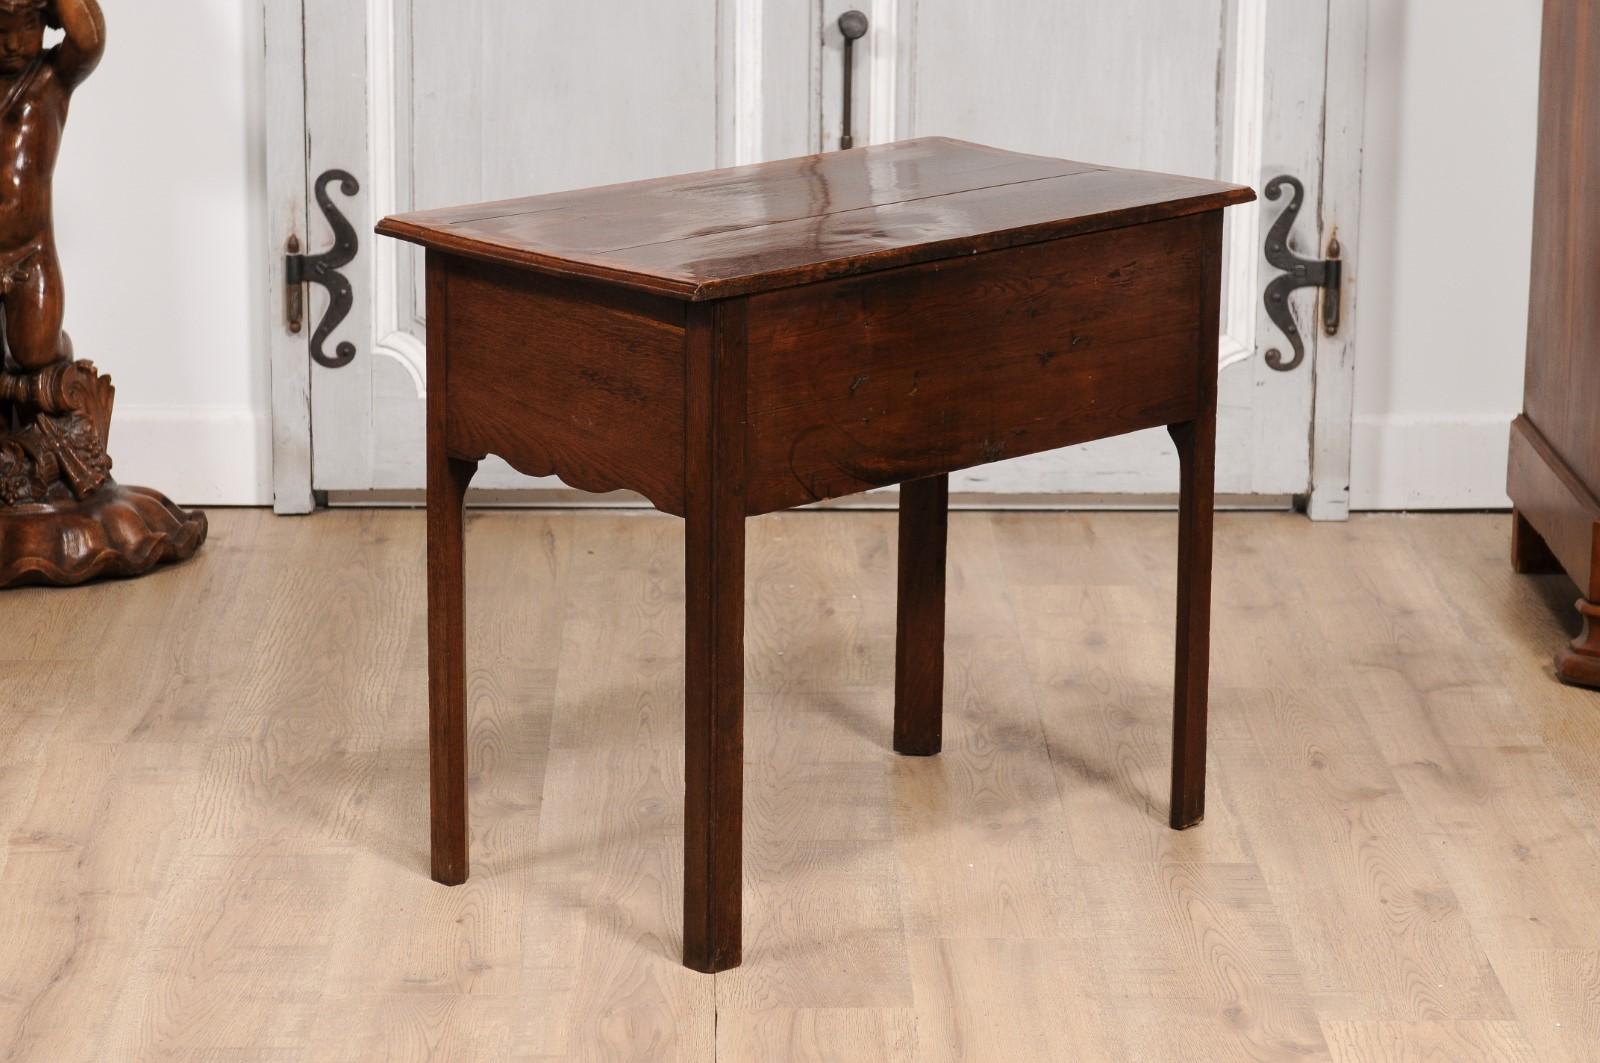 English Georgian Period 18th Century Oak Lowboy Side Table with Carved Apron For Sale 7